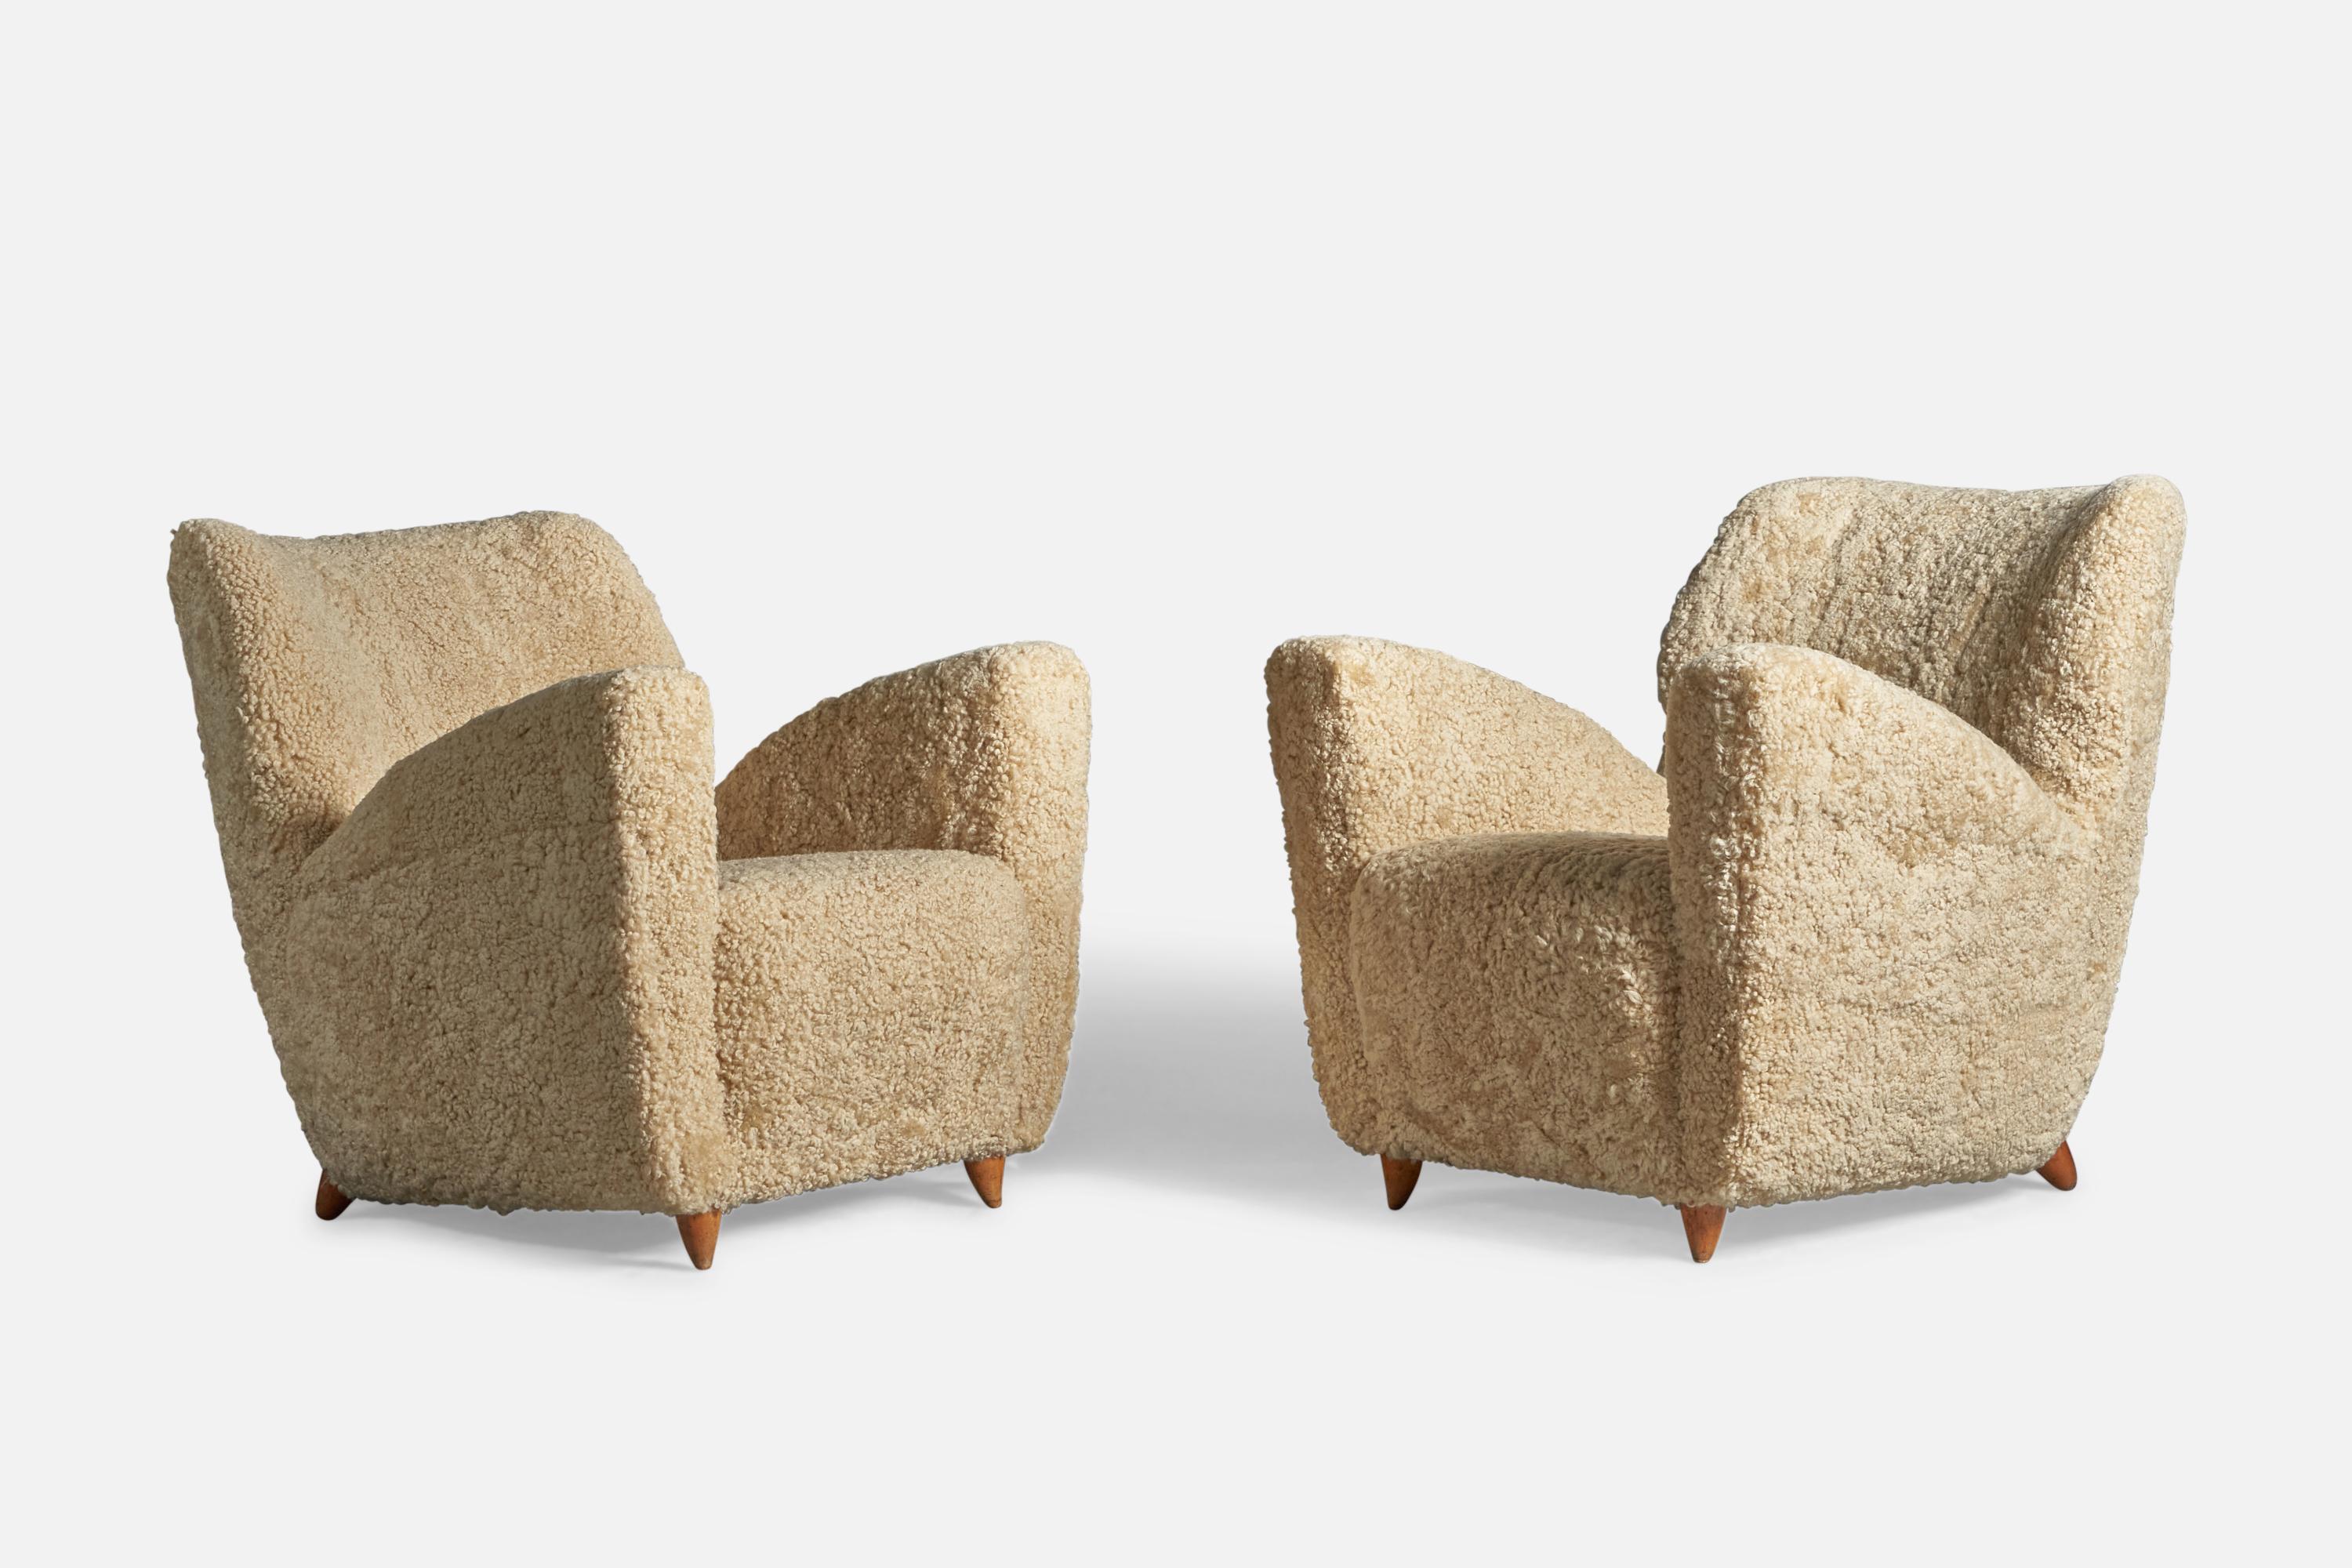 A pair of organic wood and beige shearling lounge chairs, designed and produced in Italy, 1940s.
